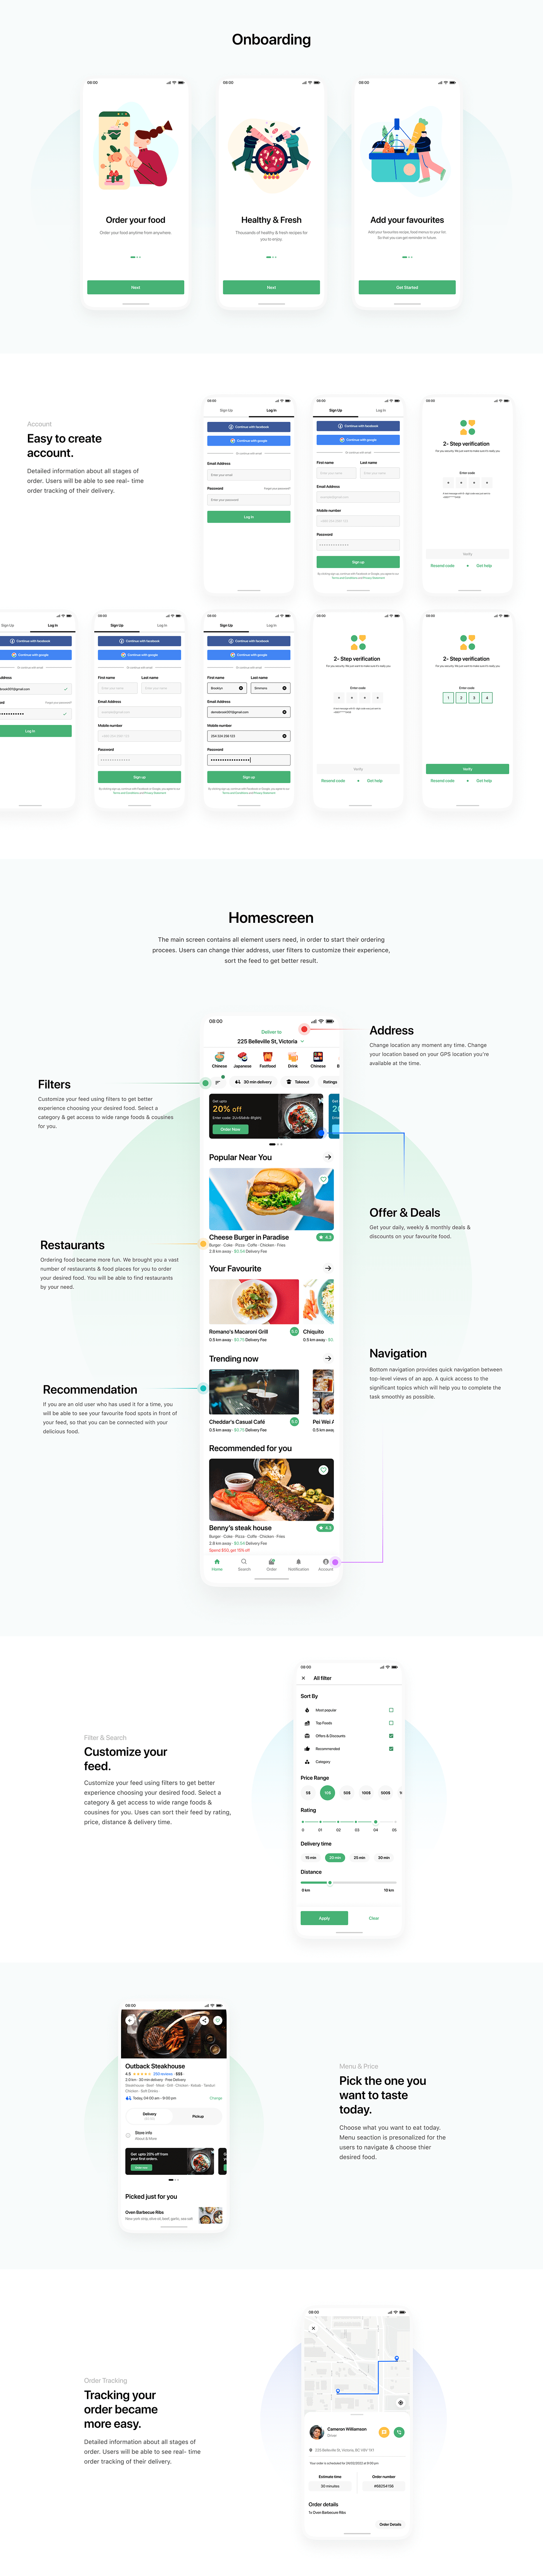 Case Study delivery design e-commerce Figma Food  ordering app ux prototype wireframe